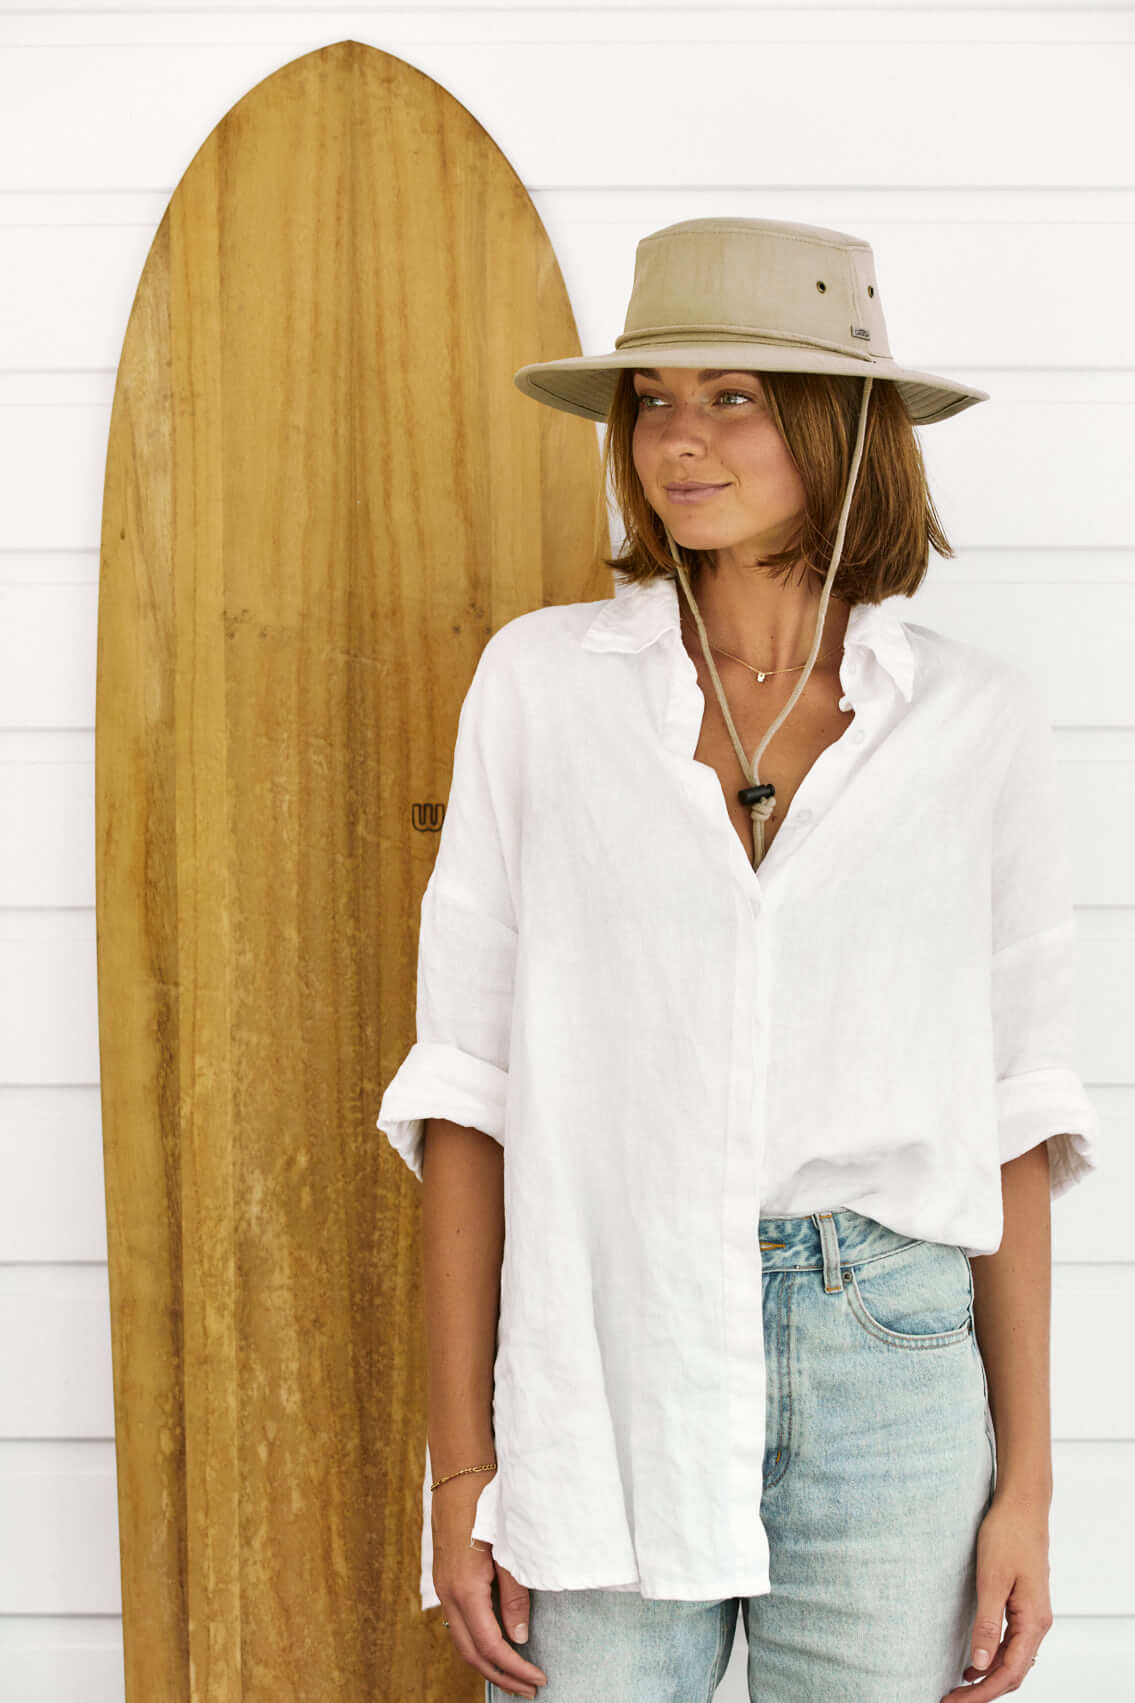 Woman standing next to a wooden surfboard in a Boonie bucket style hat made from organic cotton with wide sun protective brim and cotton chin cord